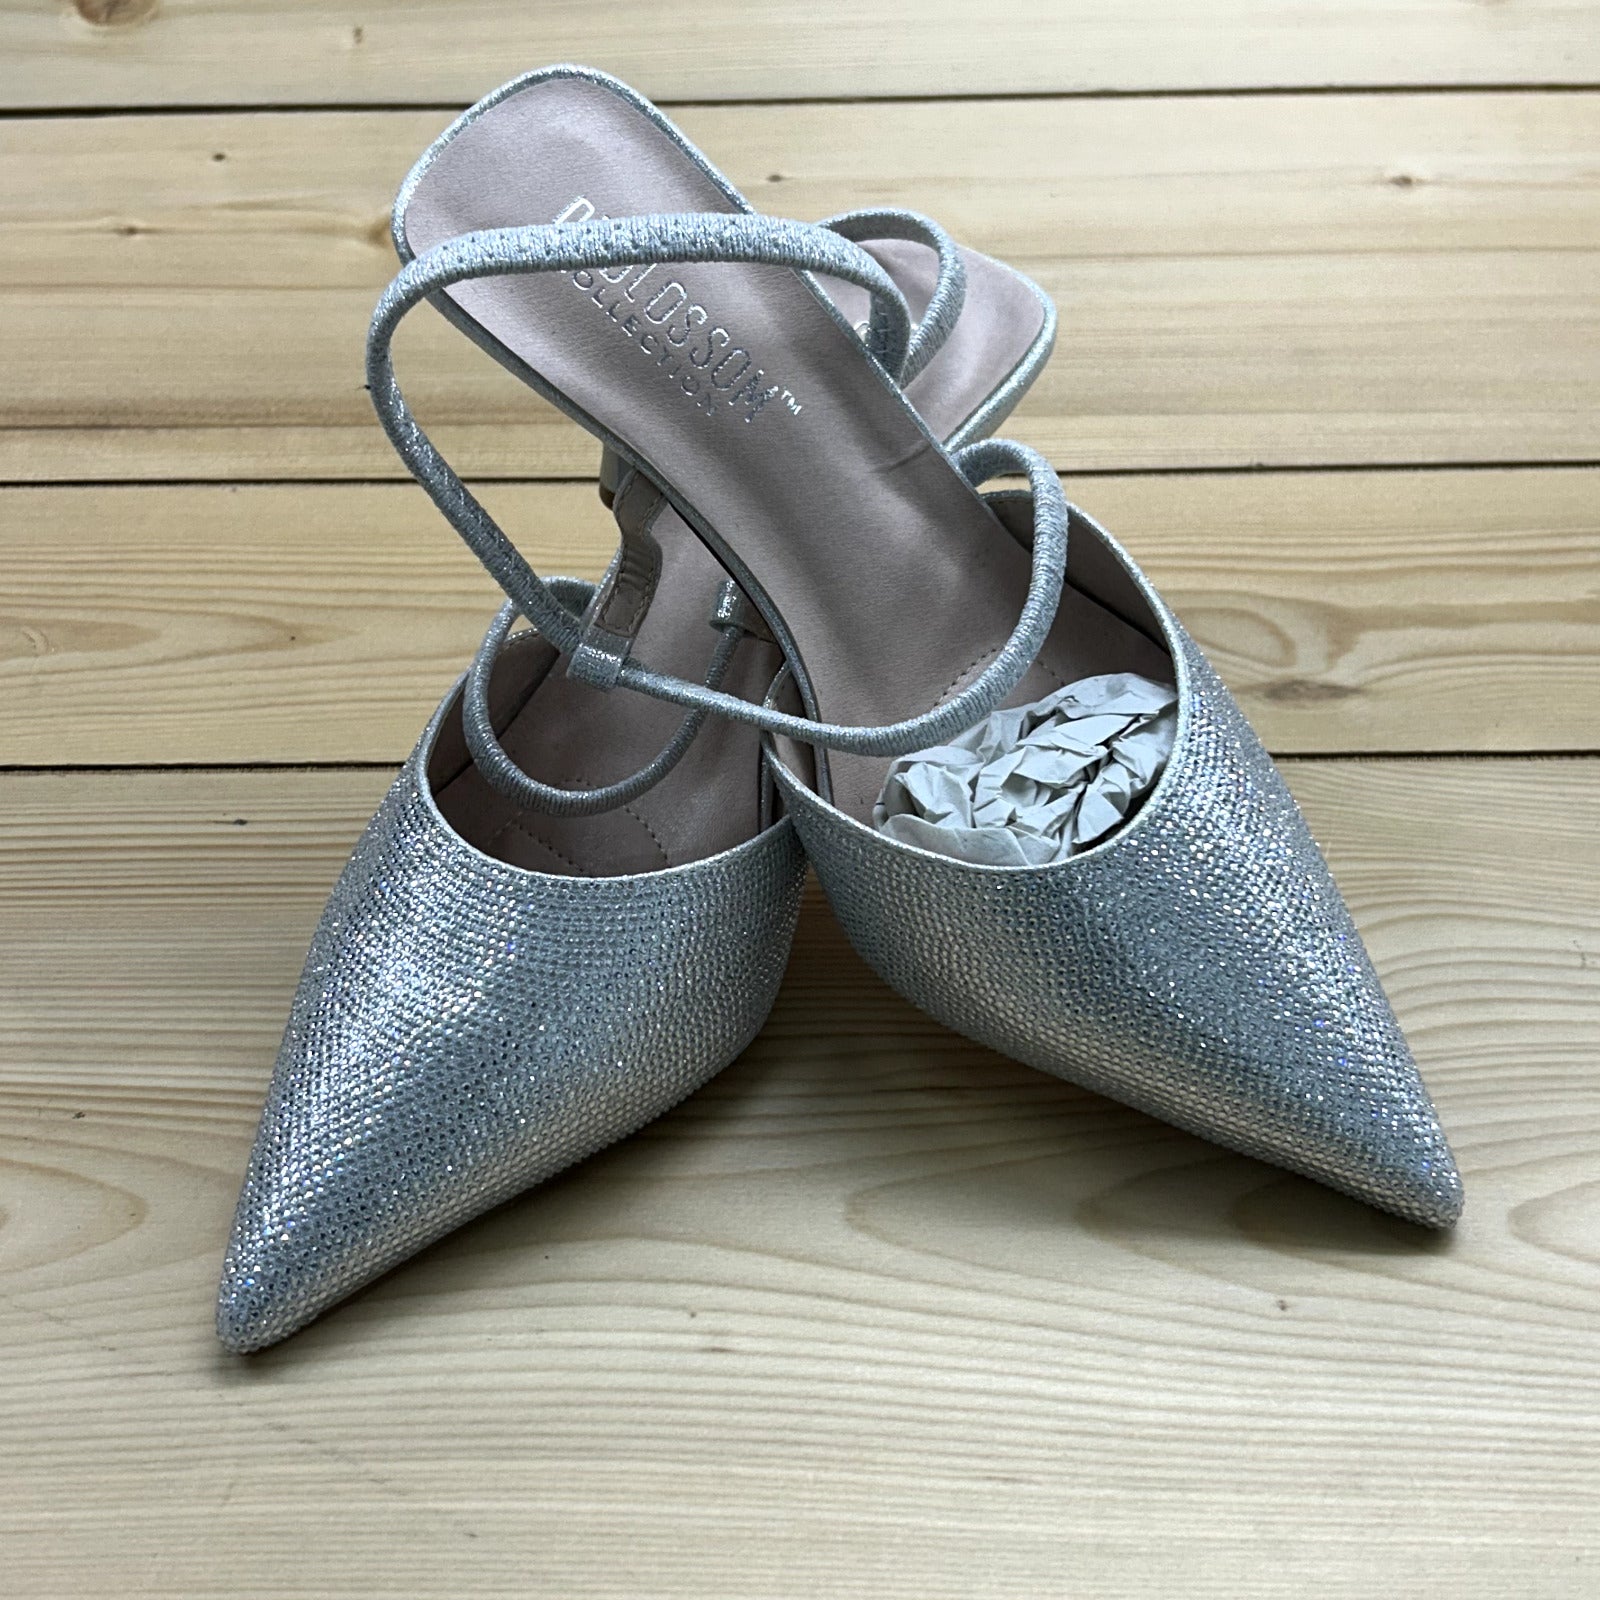 DE BLOSSOM COLLECTION MIA Silver Sparkly Pump Heels Strap Womens Size 9 NEW